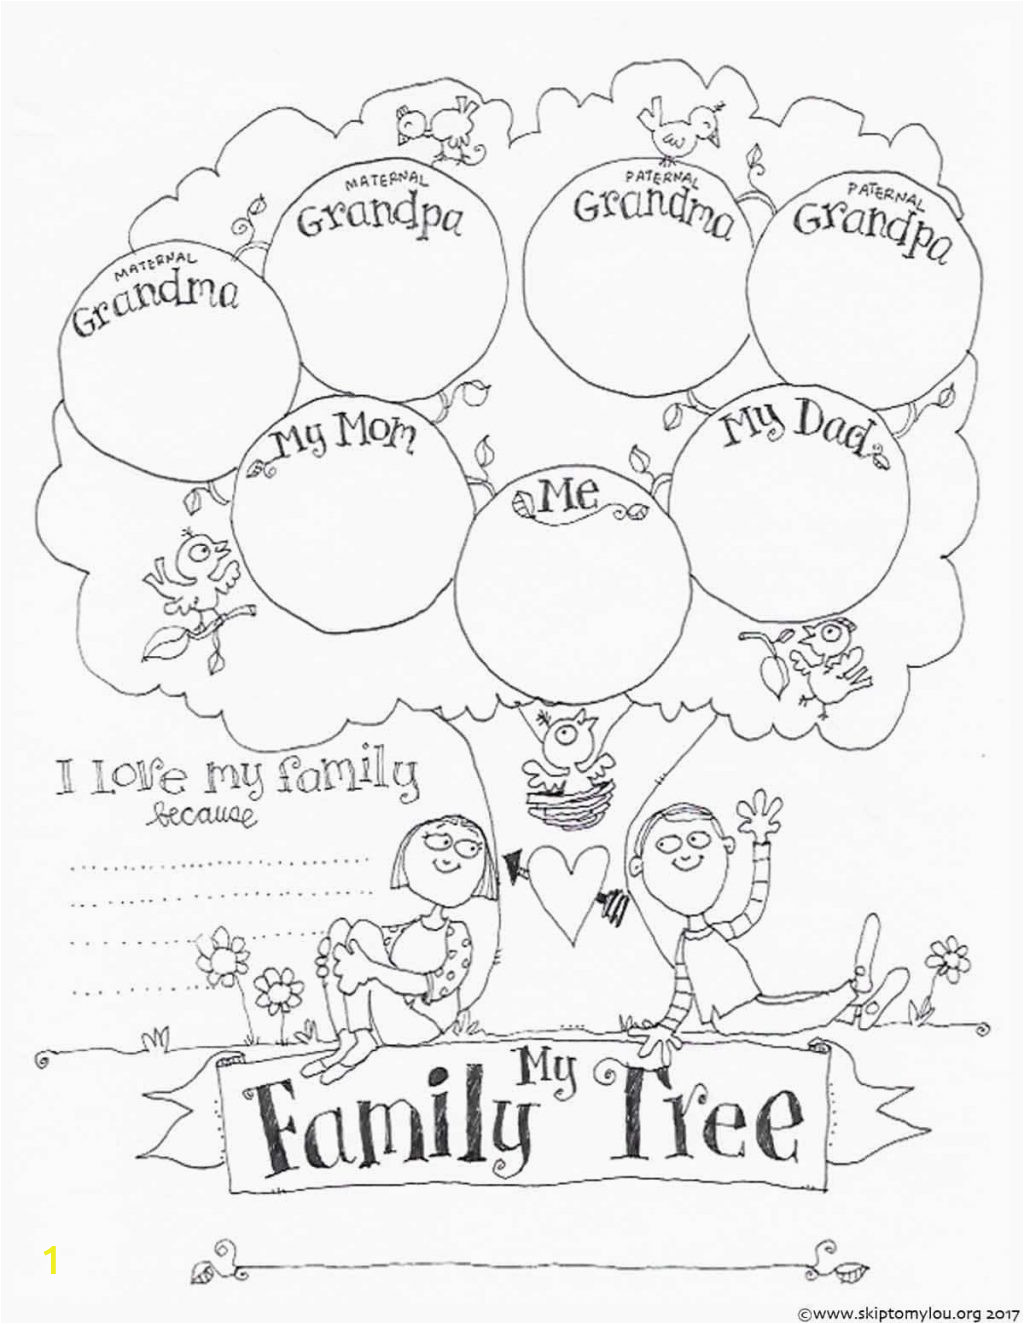 Family History Coloring Pages Lds org Coloring Book Family History Coloring Book Lds Summer